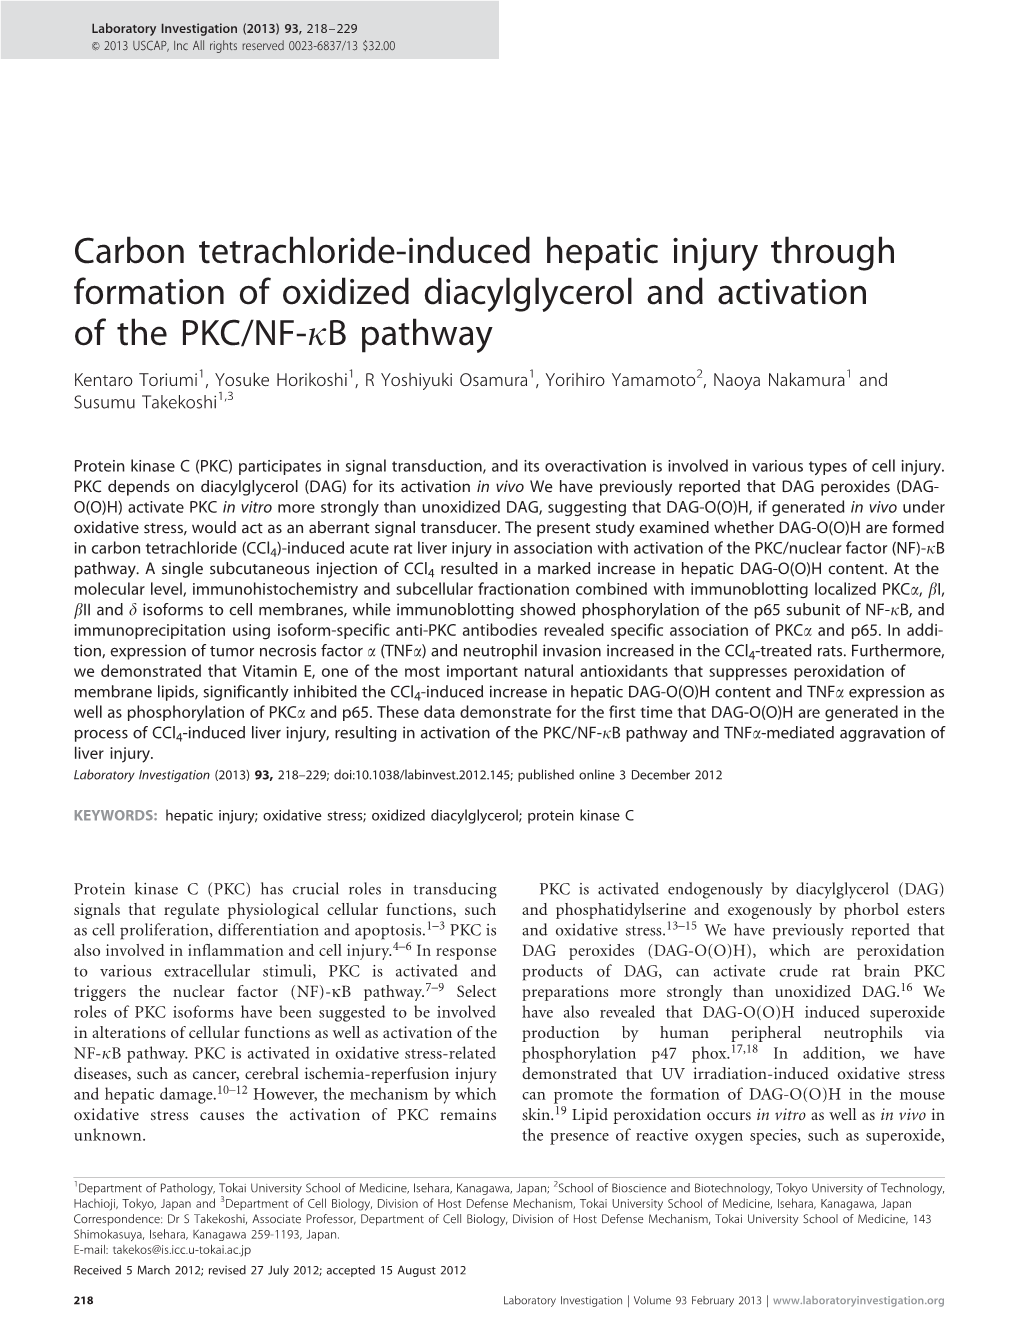 Carbon Tetrachloride-Induced Hepatic Injury Through Formation of Oxidized